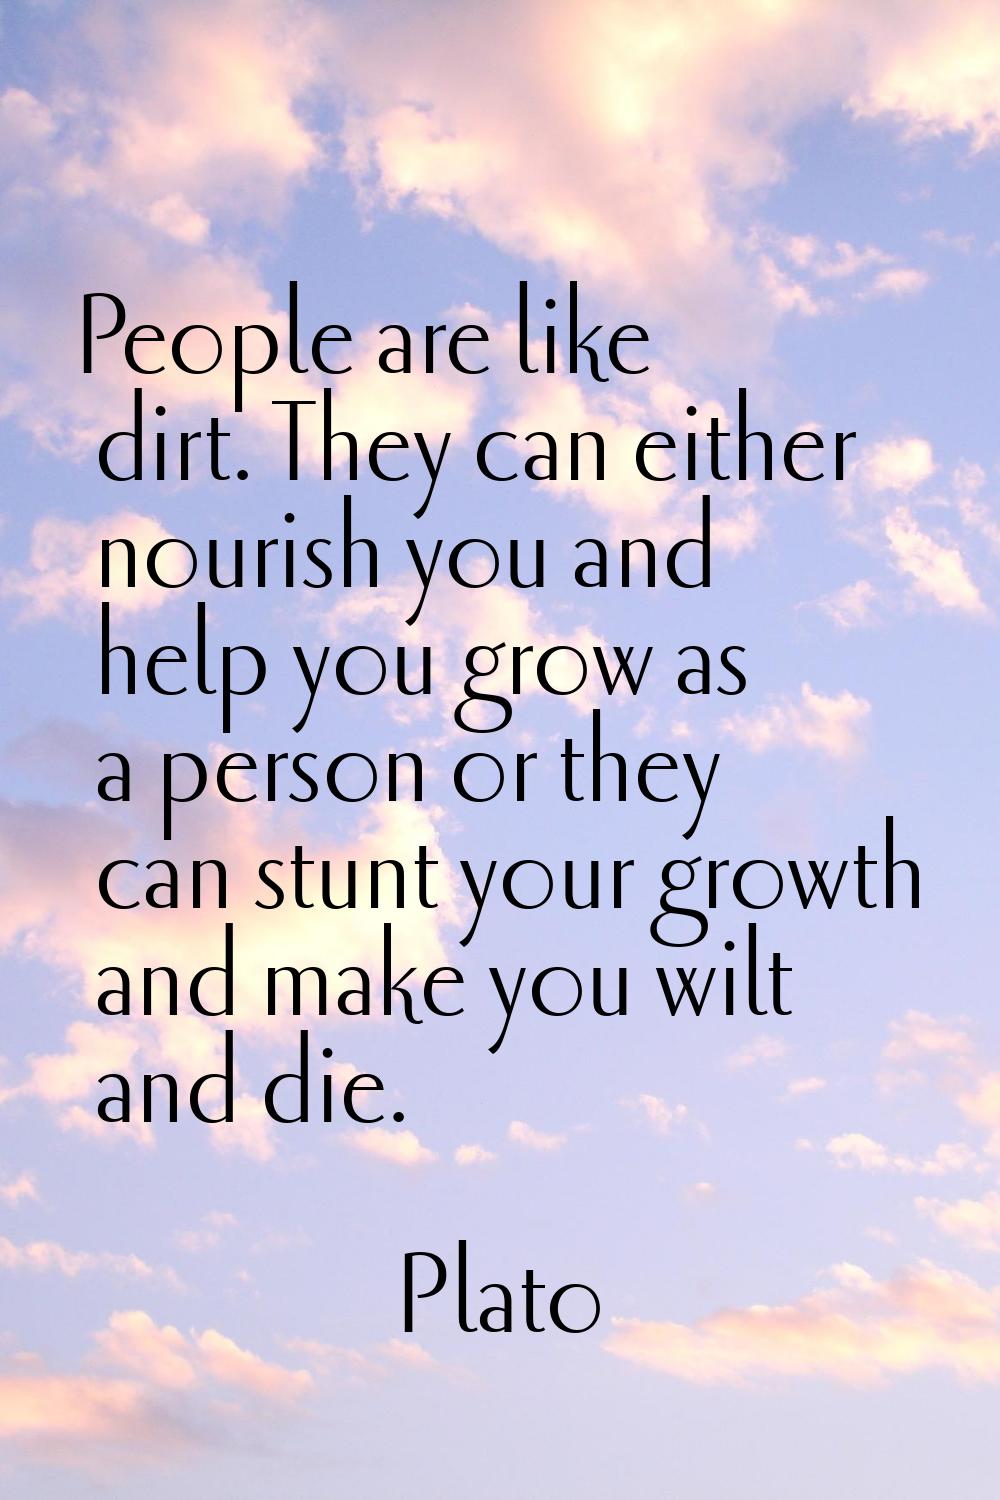 People are like dirt. They can either nourish you and help you grow as a person or they can stunt y